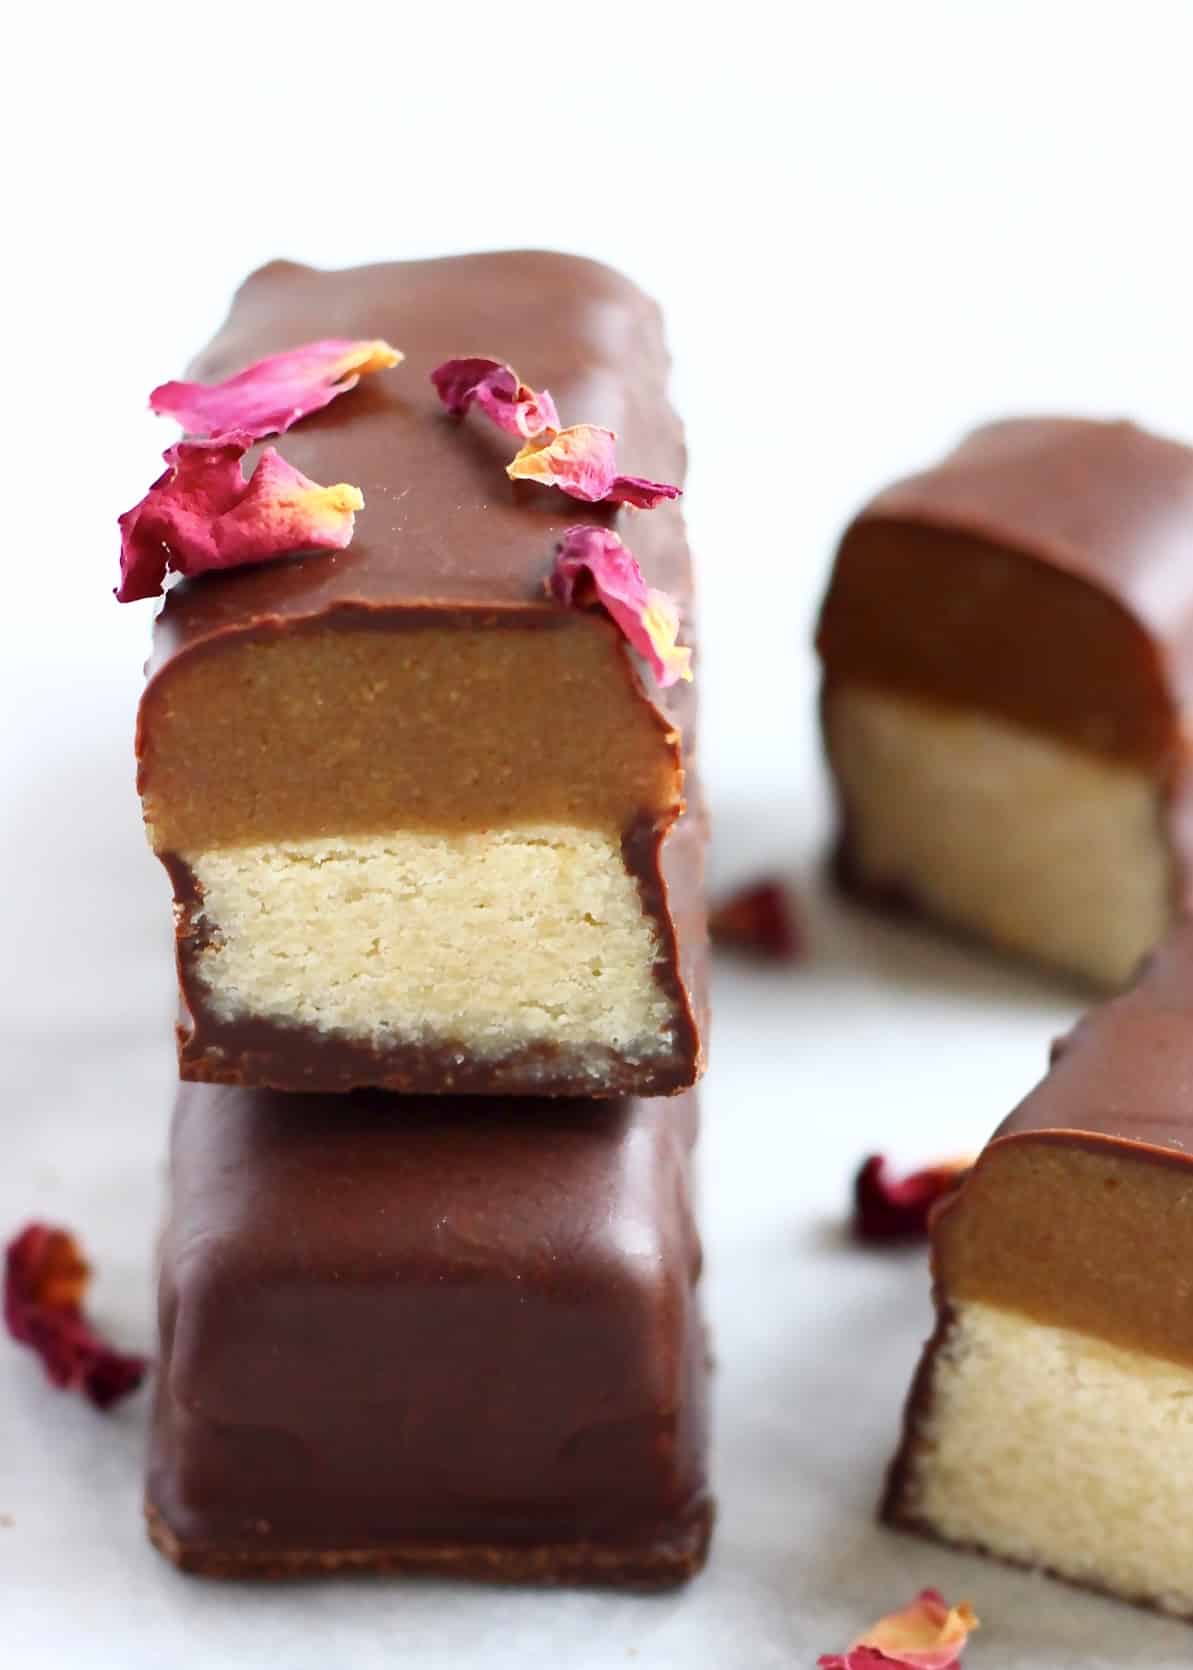 A vegan twix bar cut in half on top of a whole bar decorated with rose petals